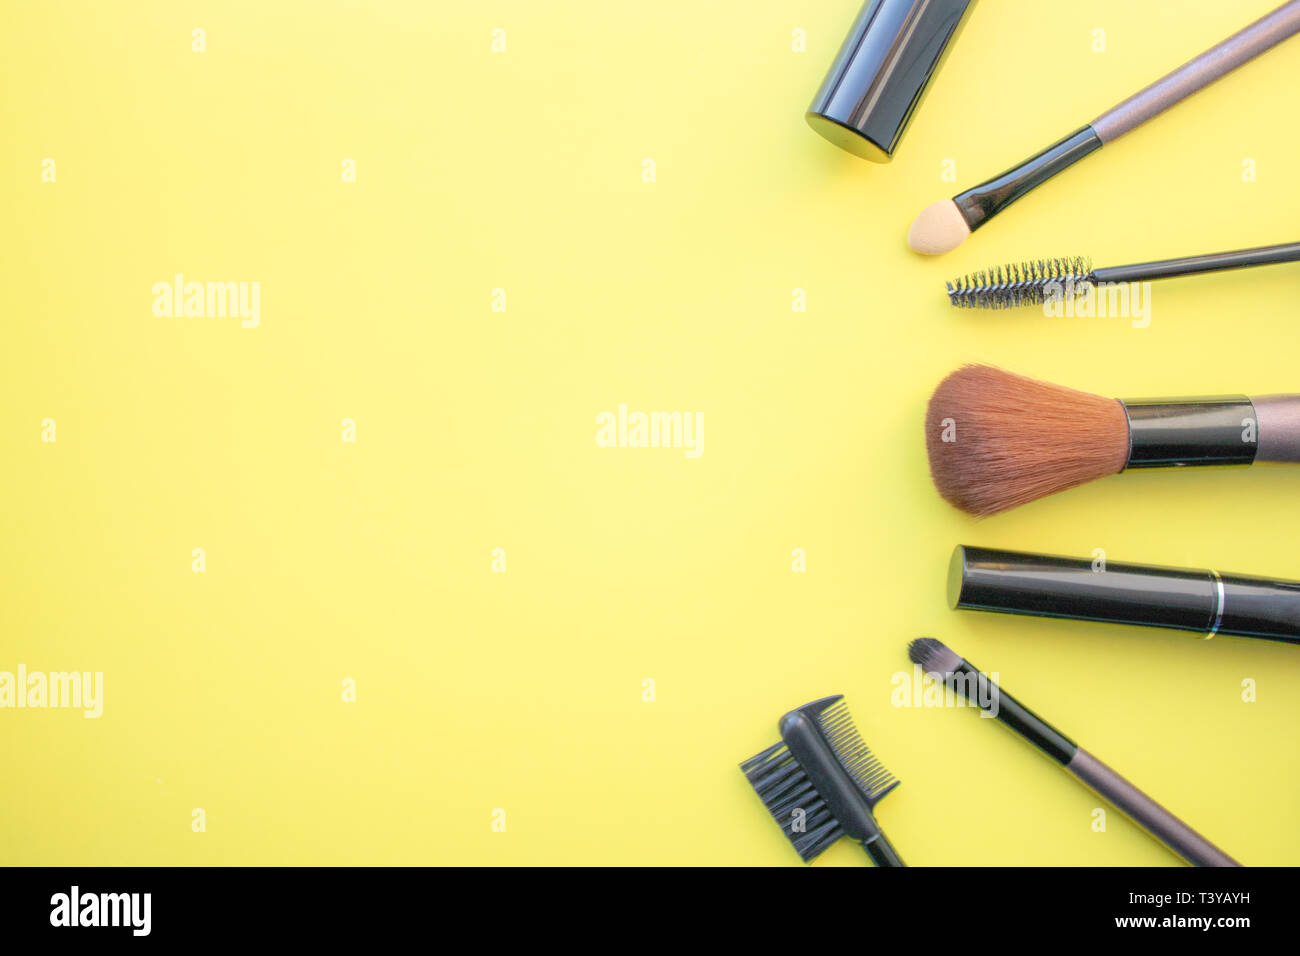 Makeup brushes, brushes for everyday makeup. Cosmetic items on yellow background, closeup. With empty space from the left. Stock Photo